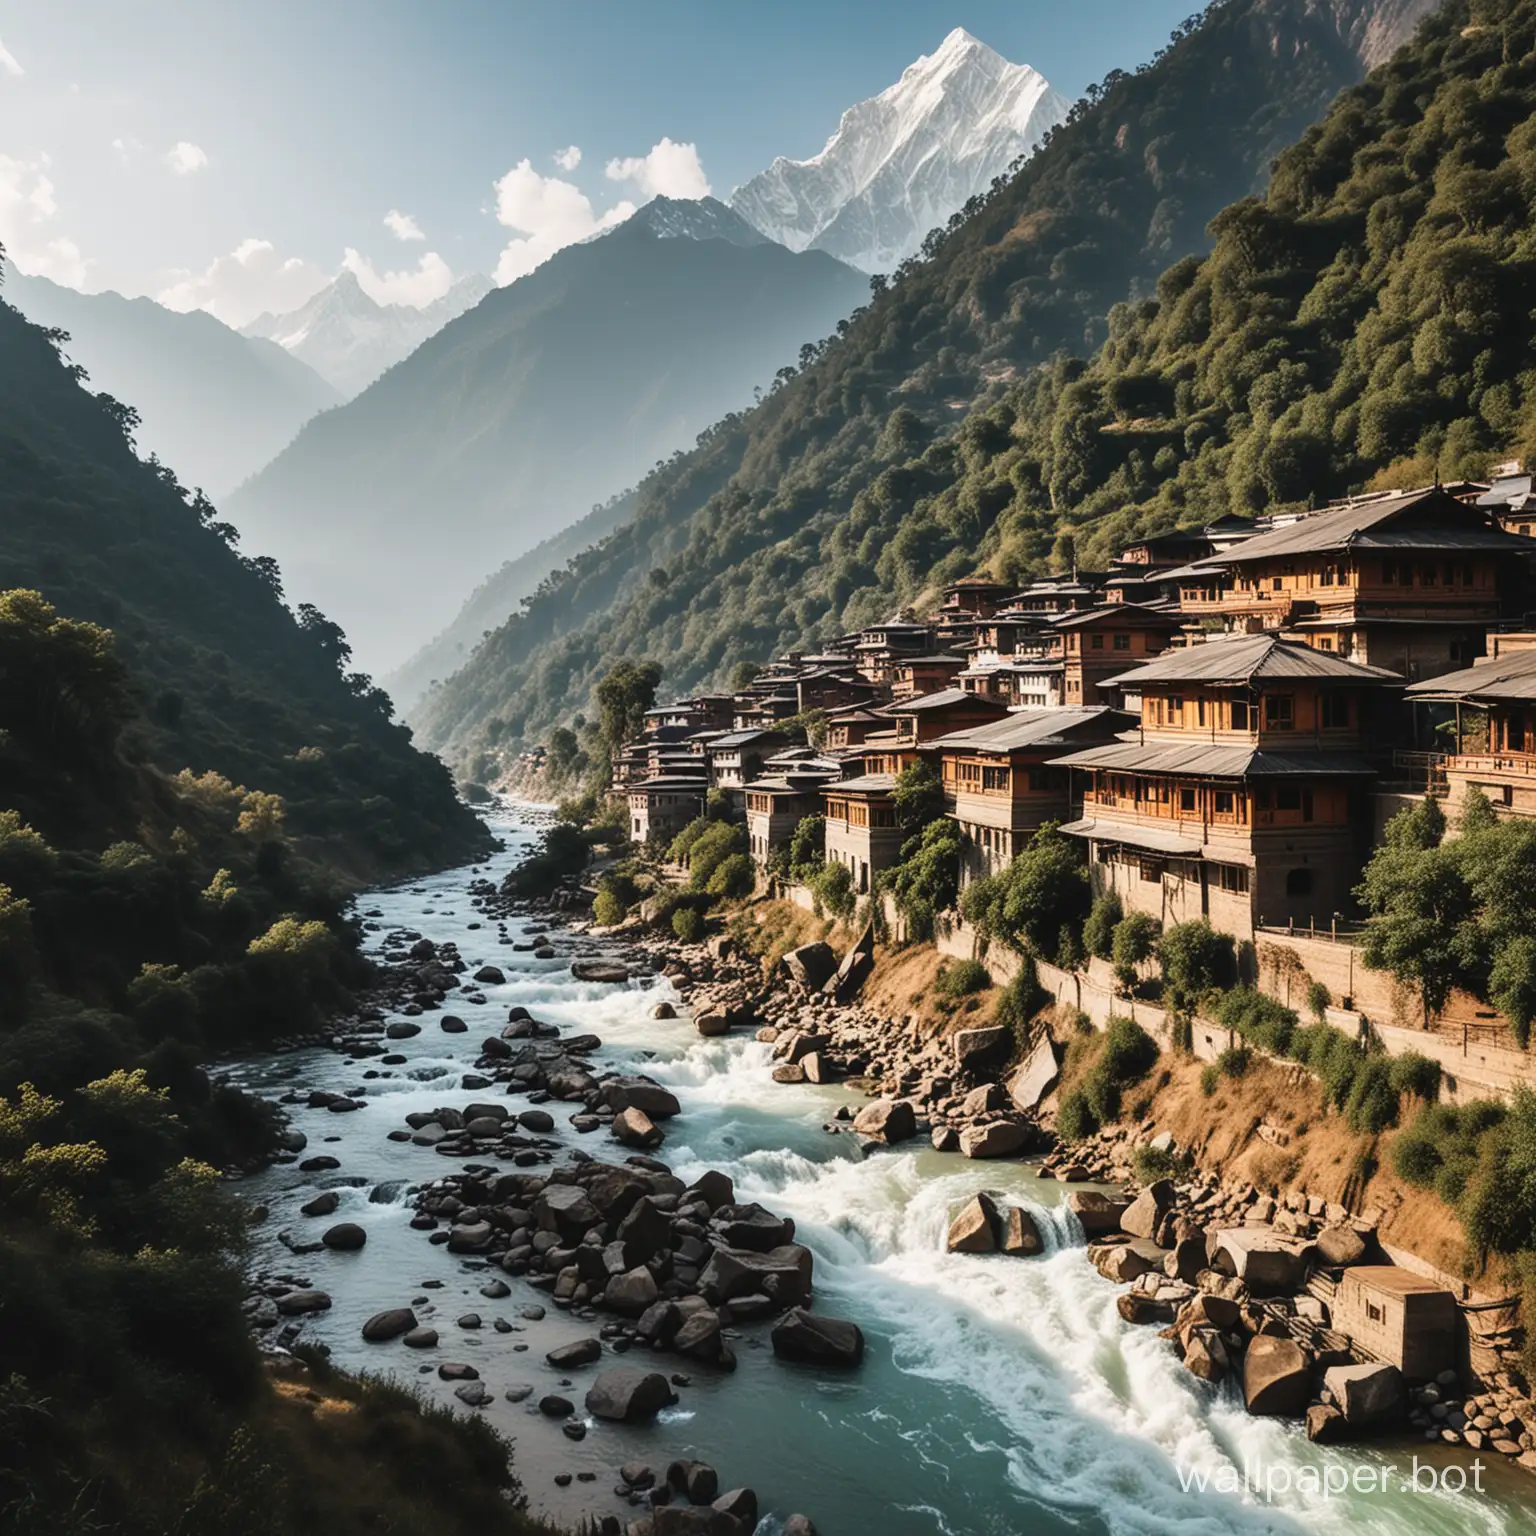 Scenic-Landscape-of-Nepal-Traditional-Houses-with-Himalayan-Peaks-and-Flowing-River